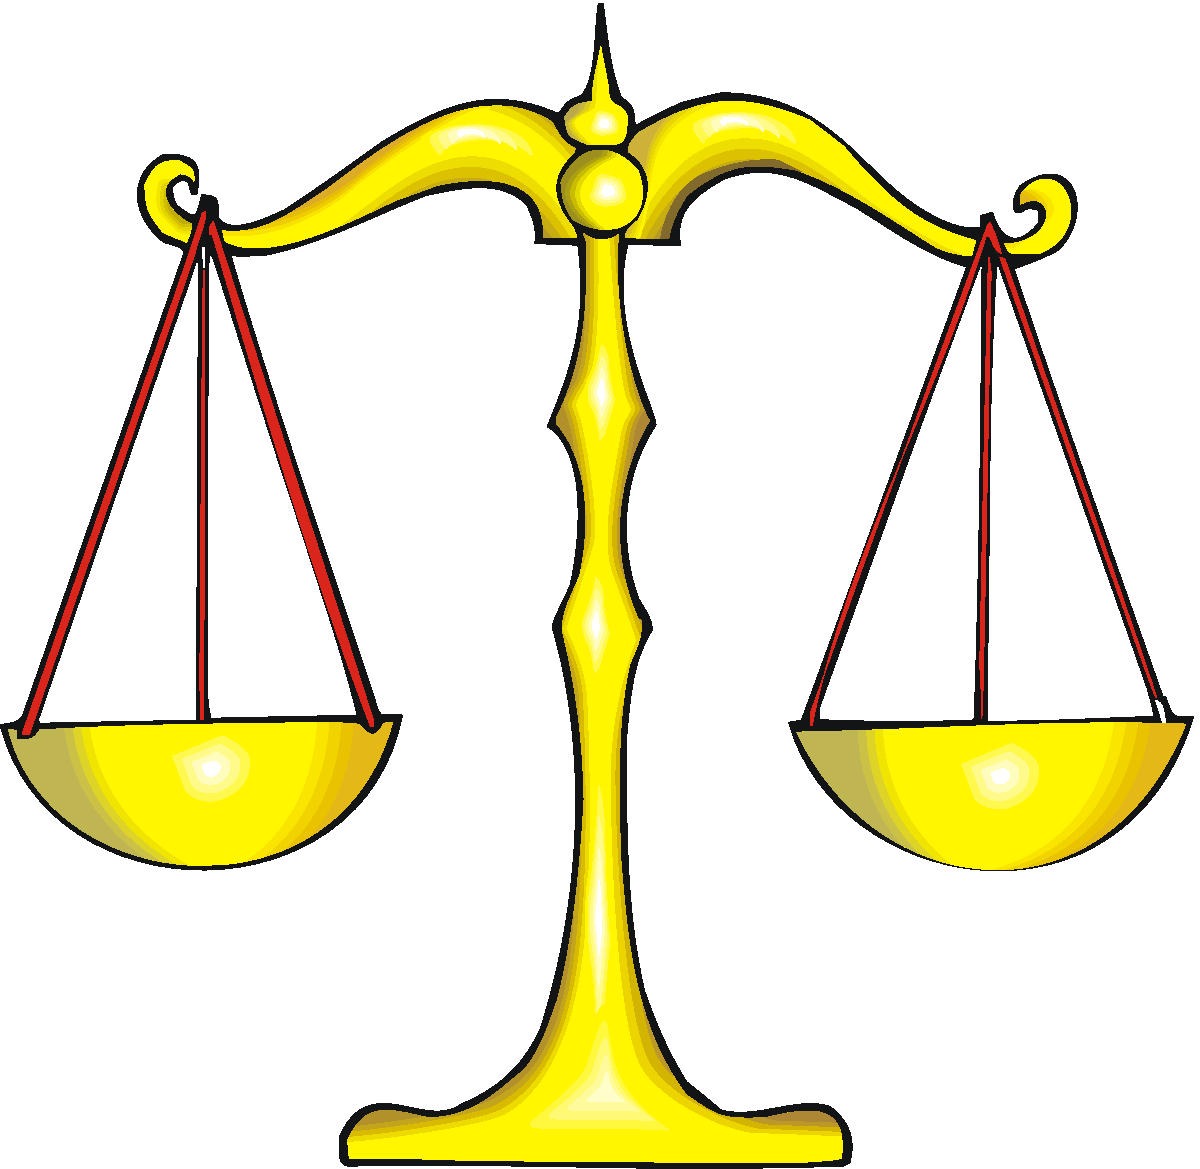 Scales clipart images